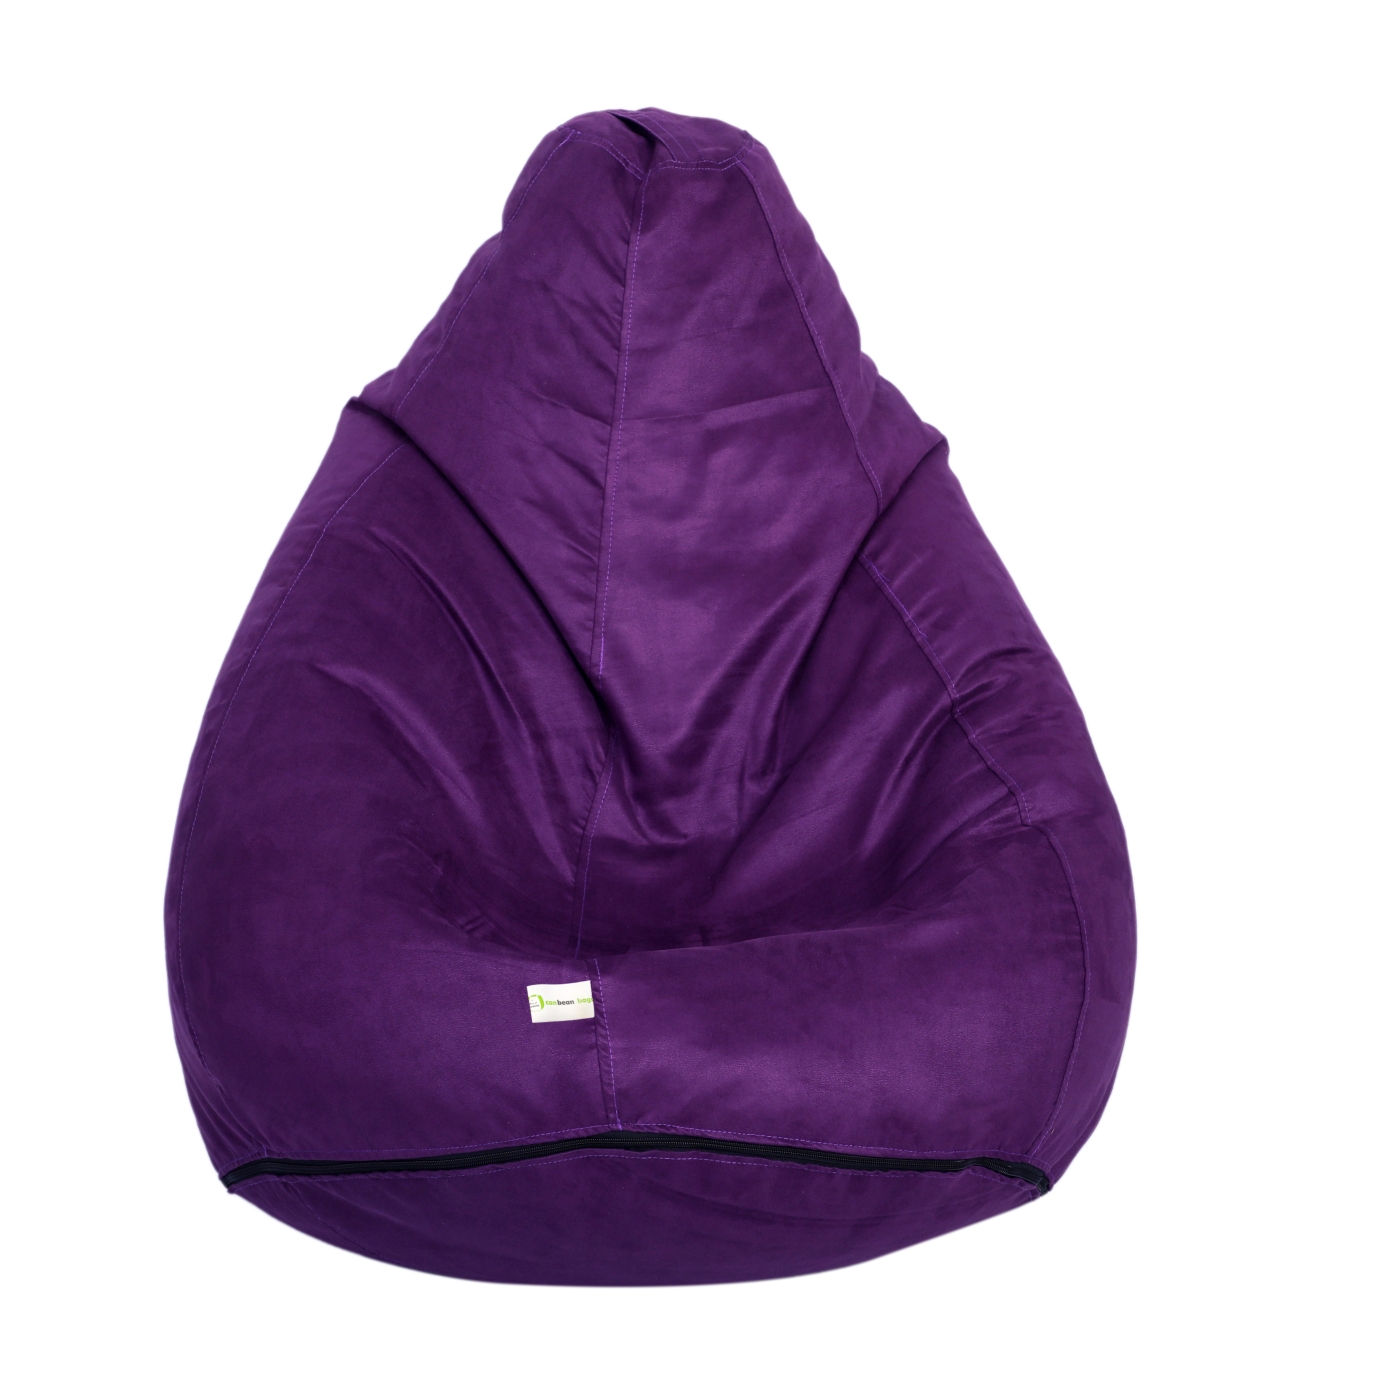 Can Bean Bags Suede Purple With Footstool Bean Bag  